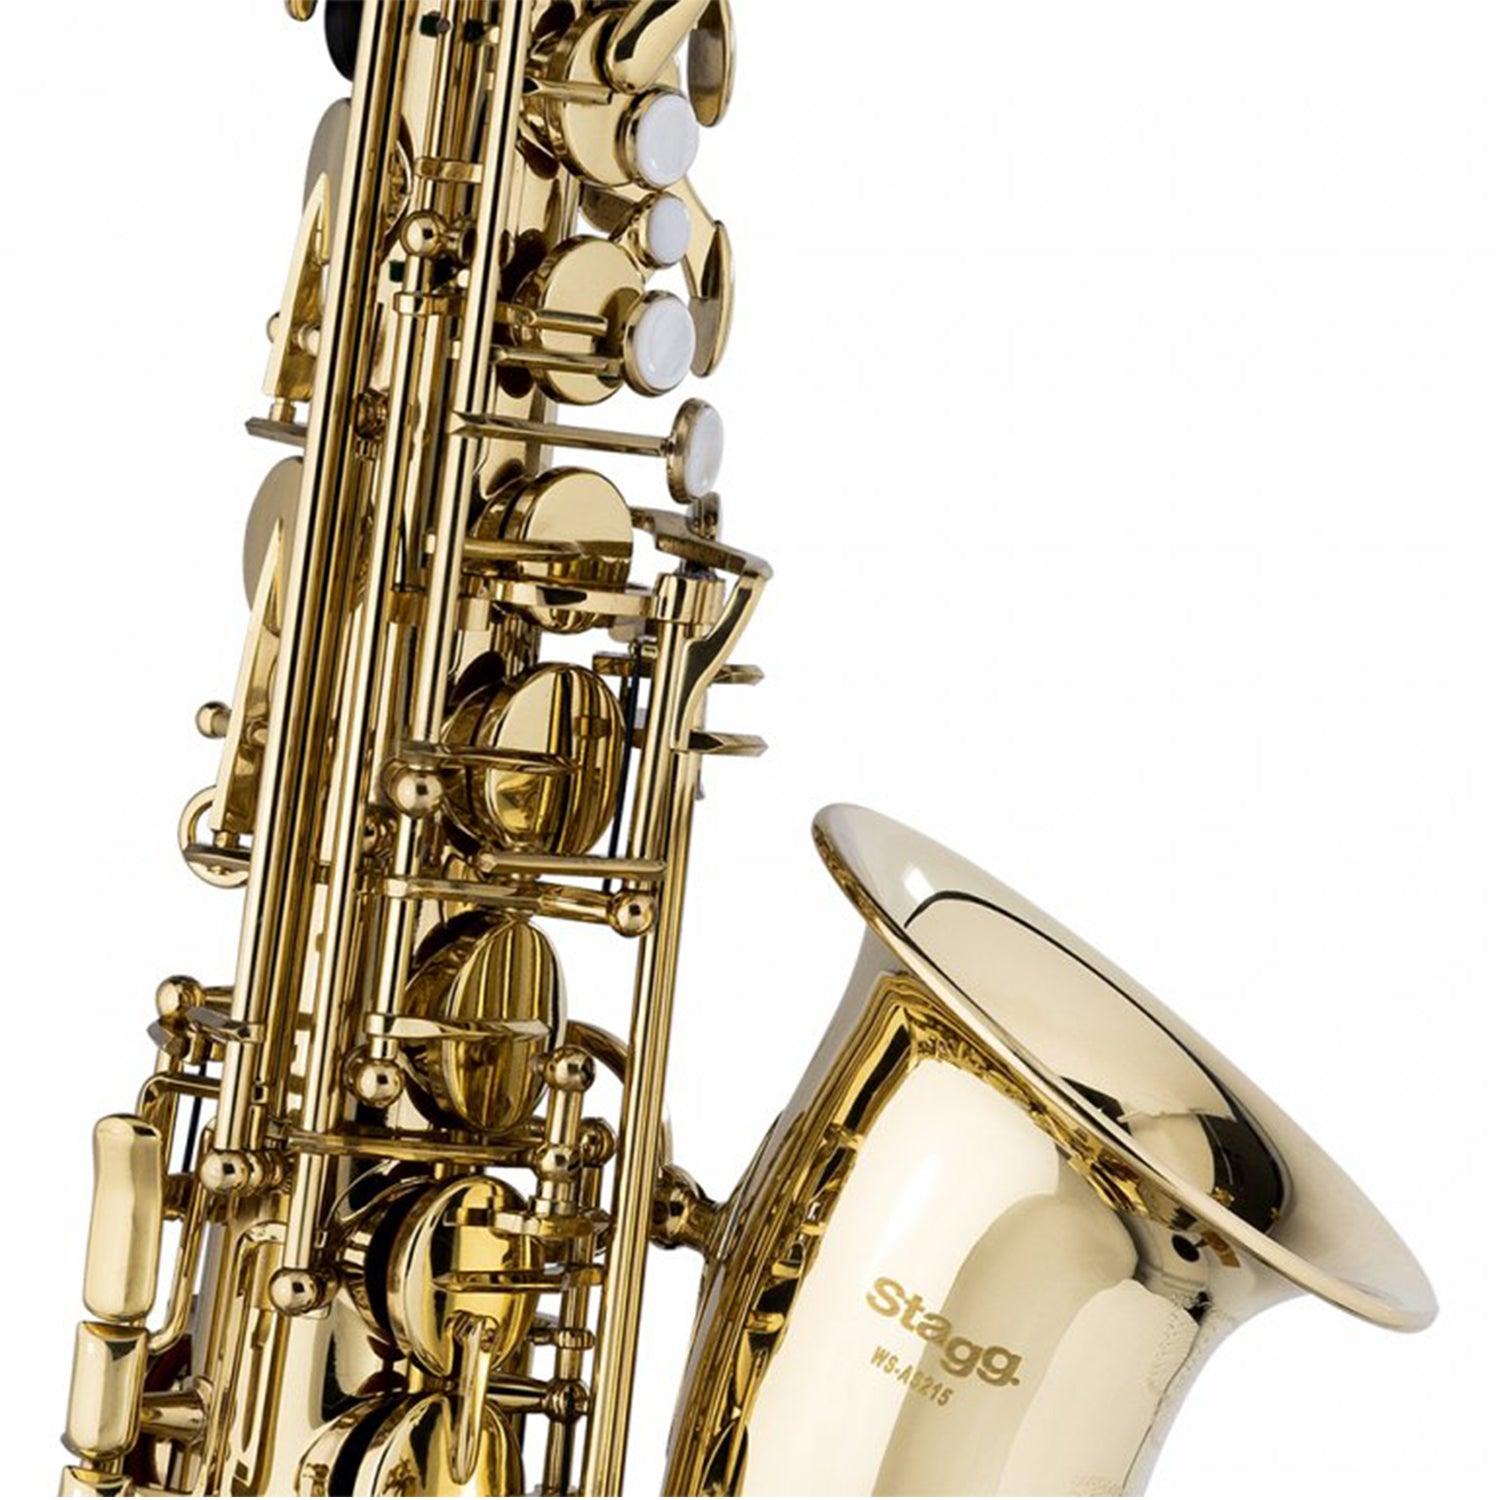 Stagg WS-AS215S Eb Alto Saxophone in Form Case - DY Pro Audio